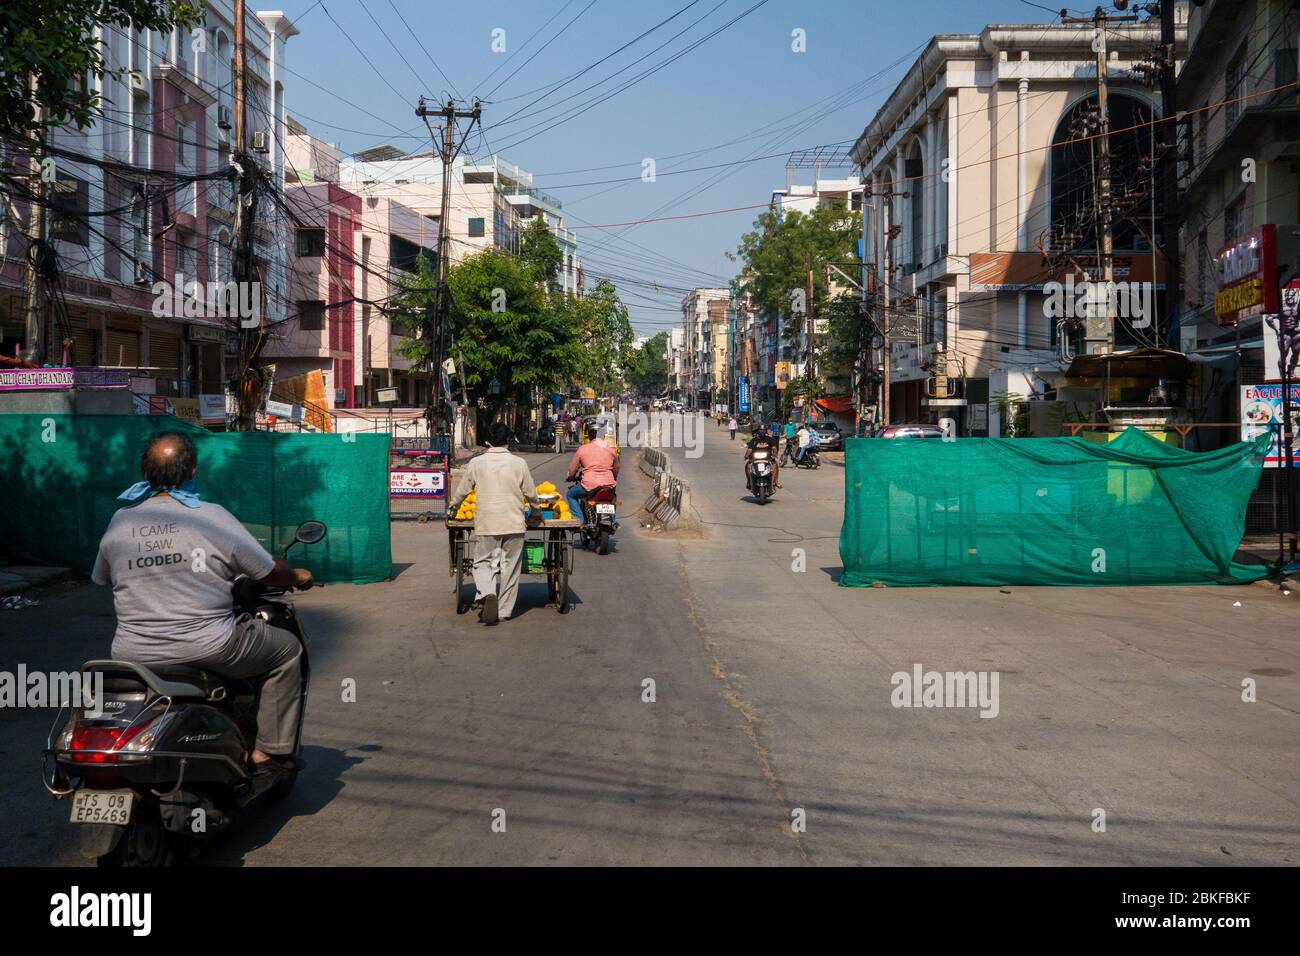 Hyderabad, India. 03 May, 2020. A temporary barricade is seen across a road near Lakdikapul in Hyderabad city,during government imposed nationwide loc Stock Photo